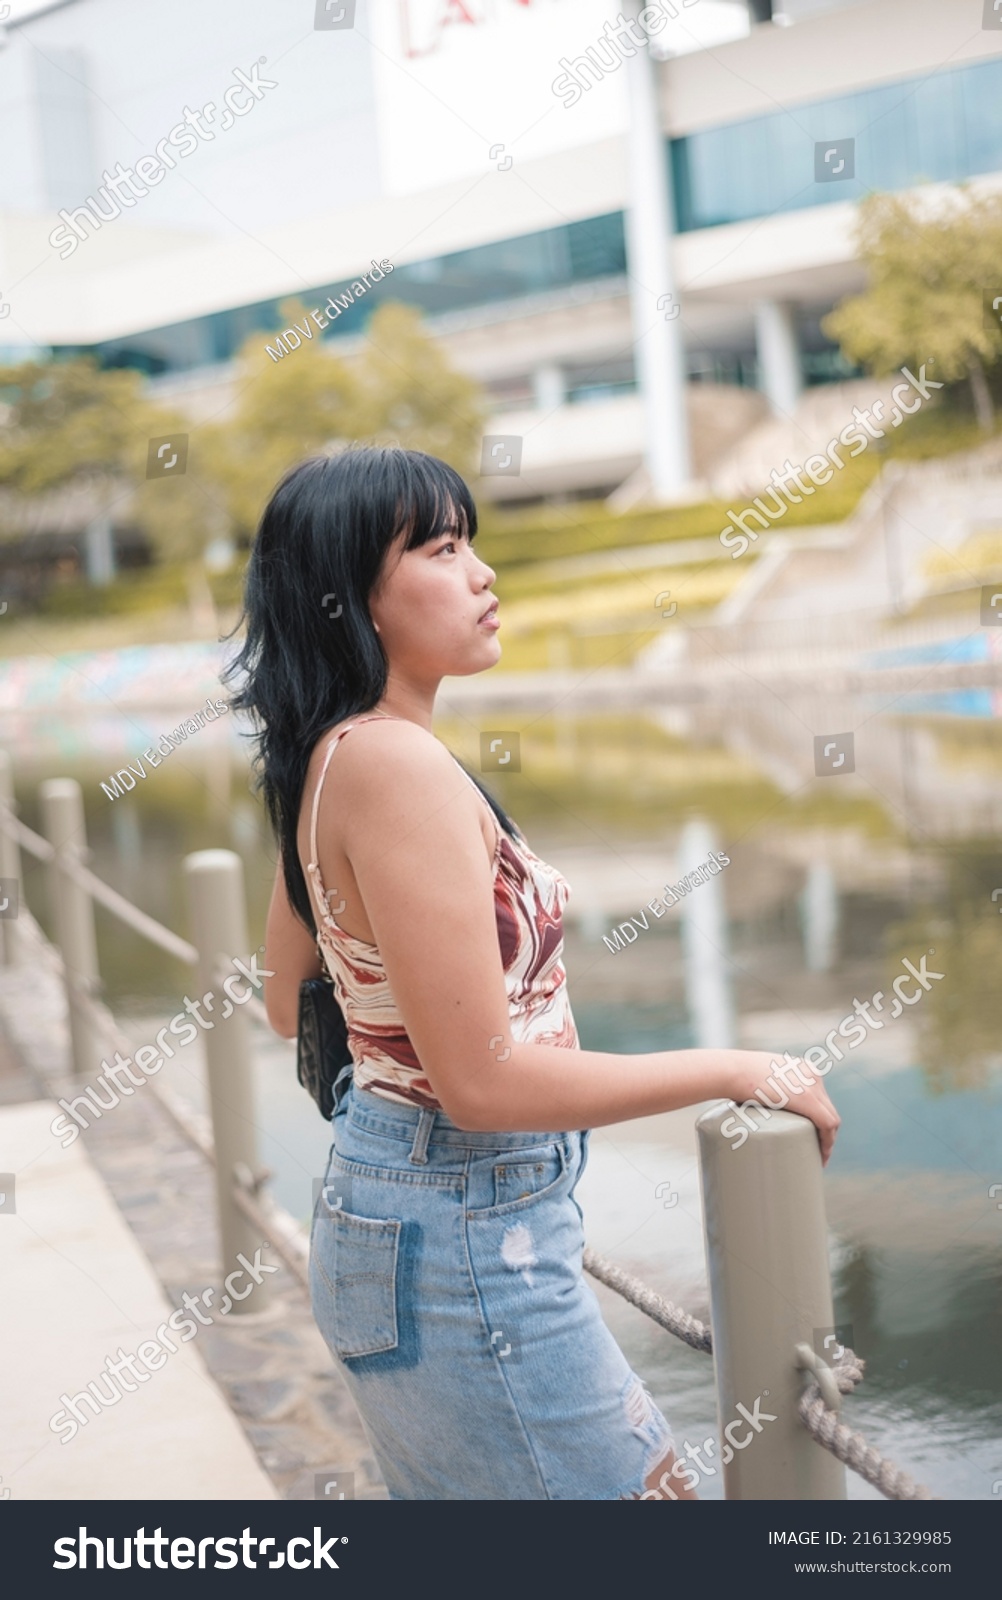 A fashionable woman with a a spaghetti strap top and denim skirt. A female with broad shoulders, a small bust and rectangular body shape. #2161329985